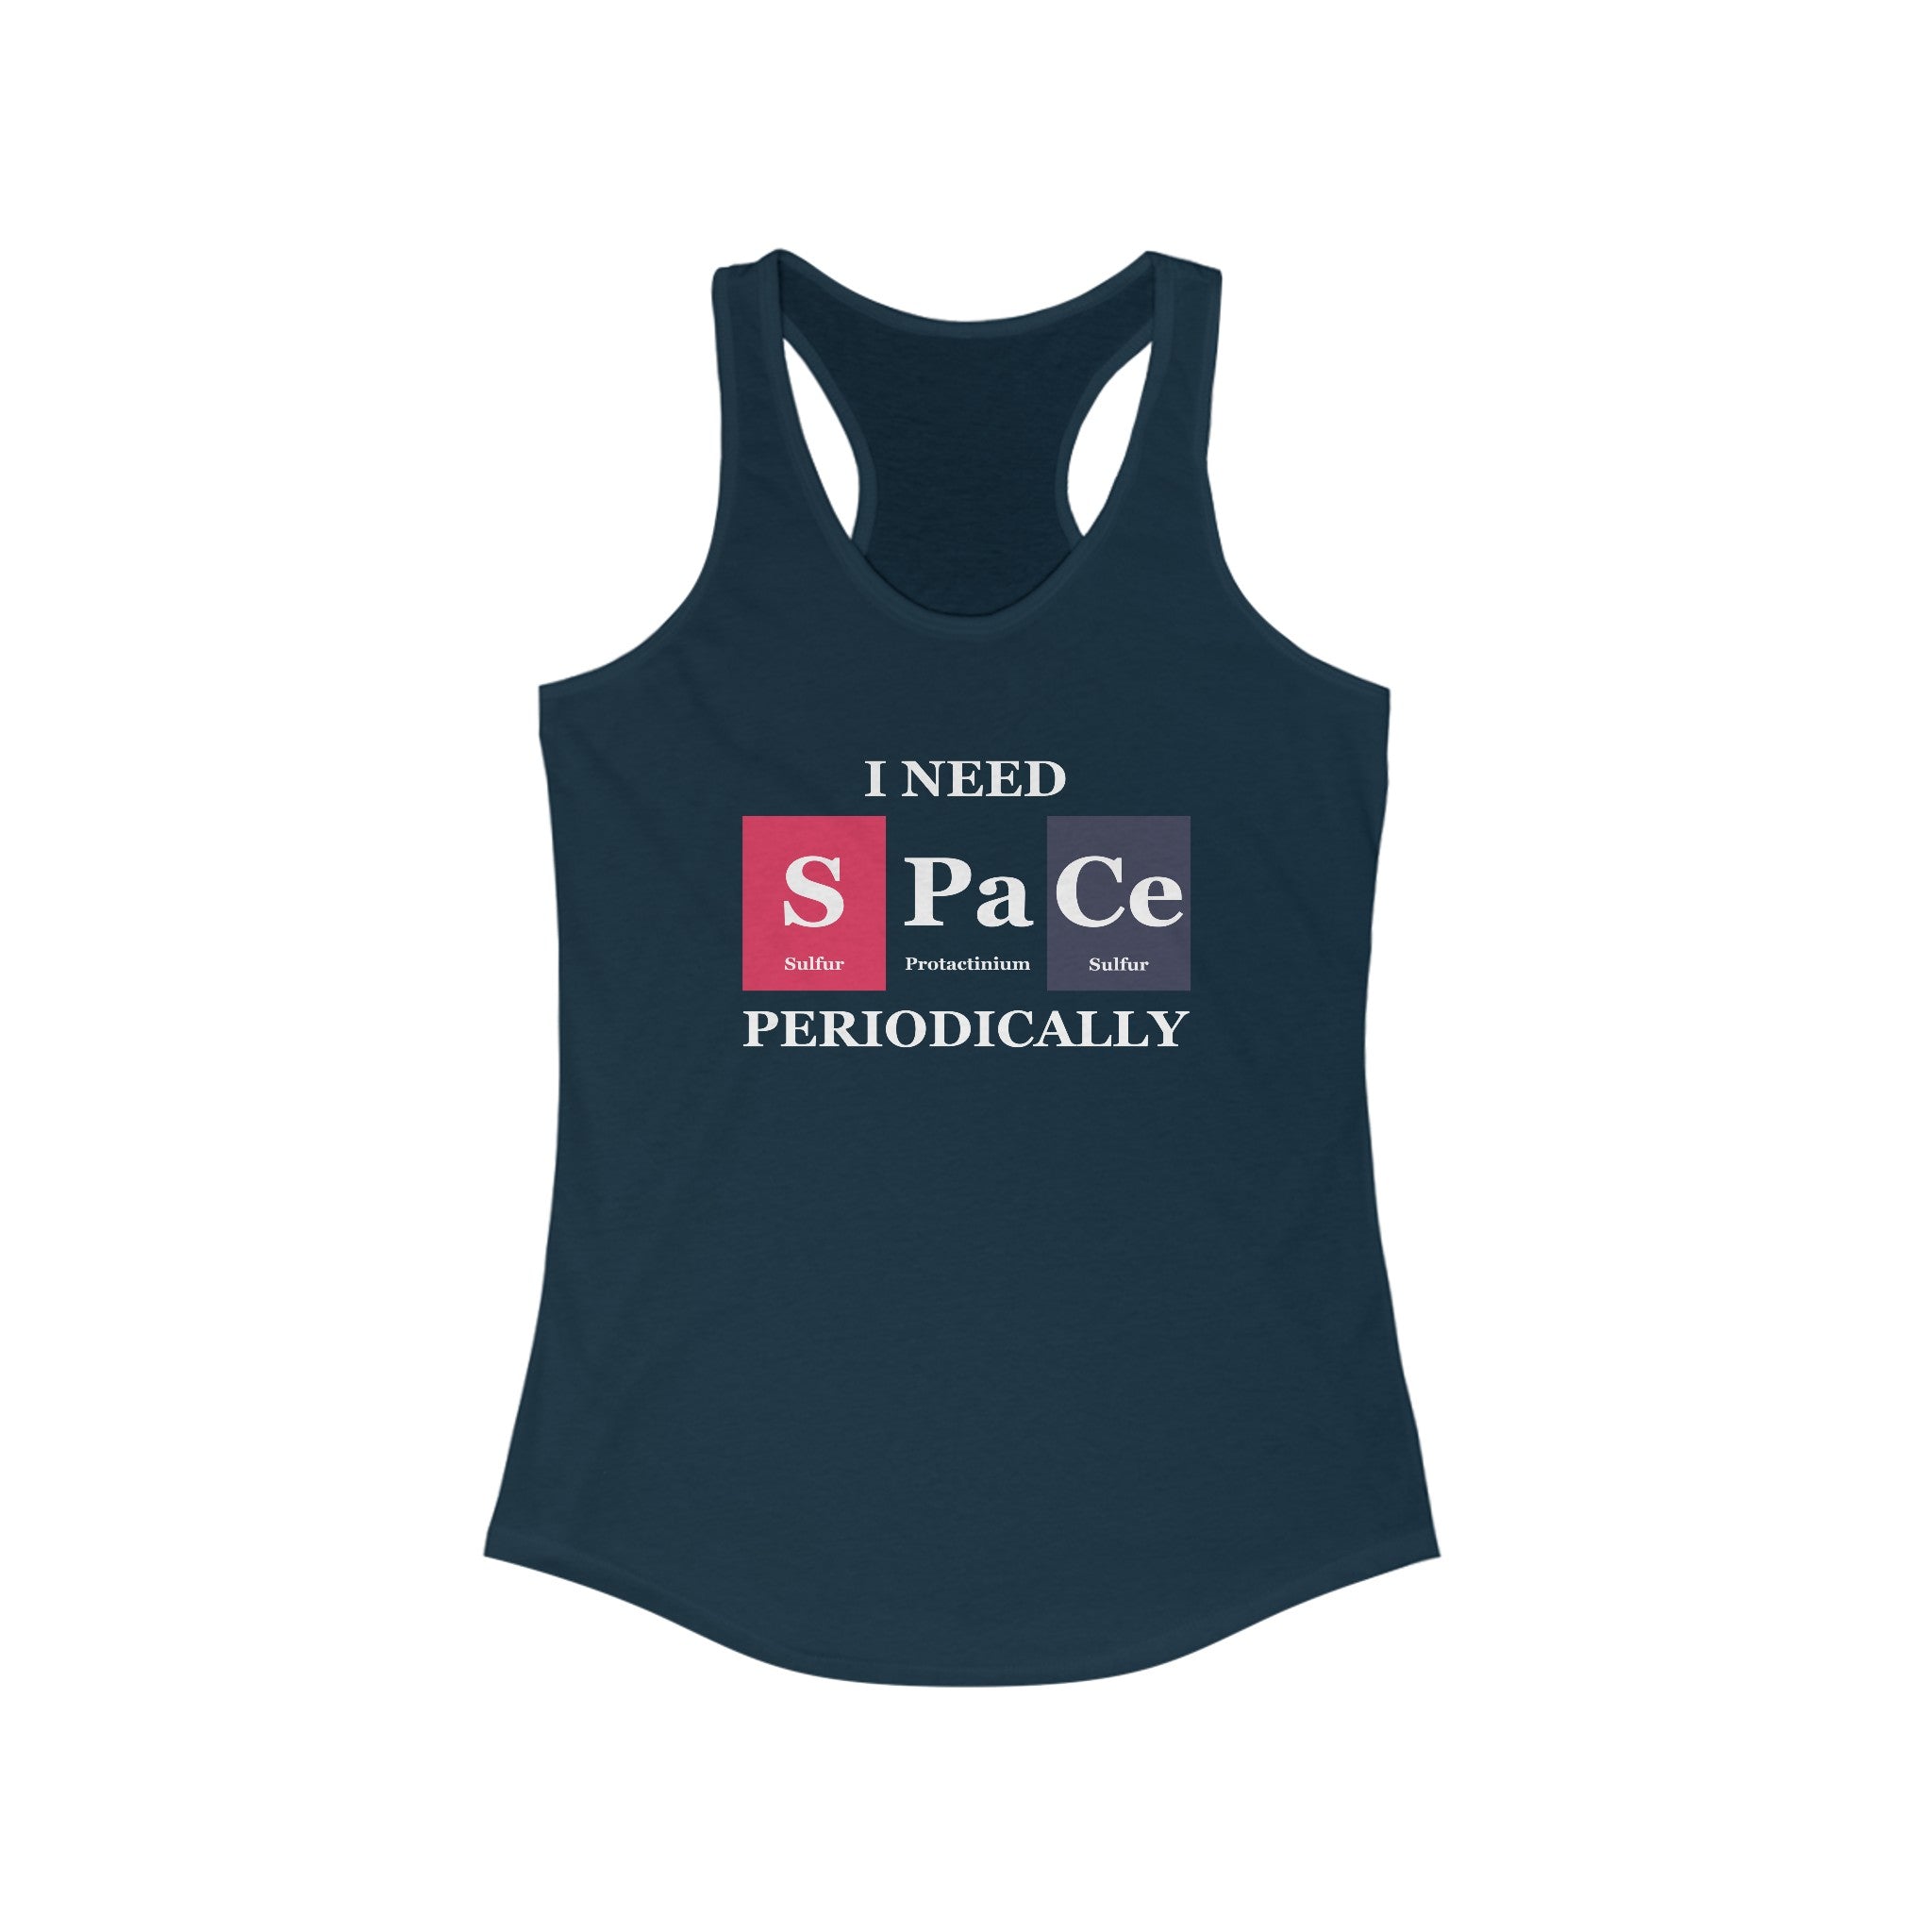 A dark blue S-Pa-Ce - Women's Racerback Tank with the text "I need space periodically" using symbols for sulfur (S), phosphorus (P), and cerium (Ce) from the periodic table of elements. This ultra-lightweight tank top showcases unique S-Pa-Ce designs perfect for any science enthusiast.